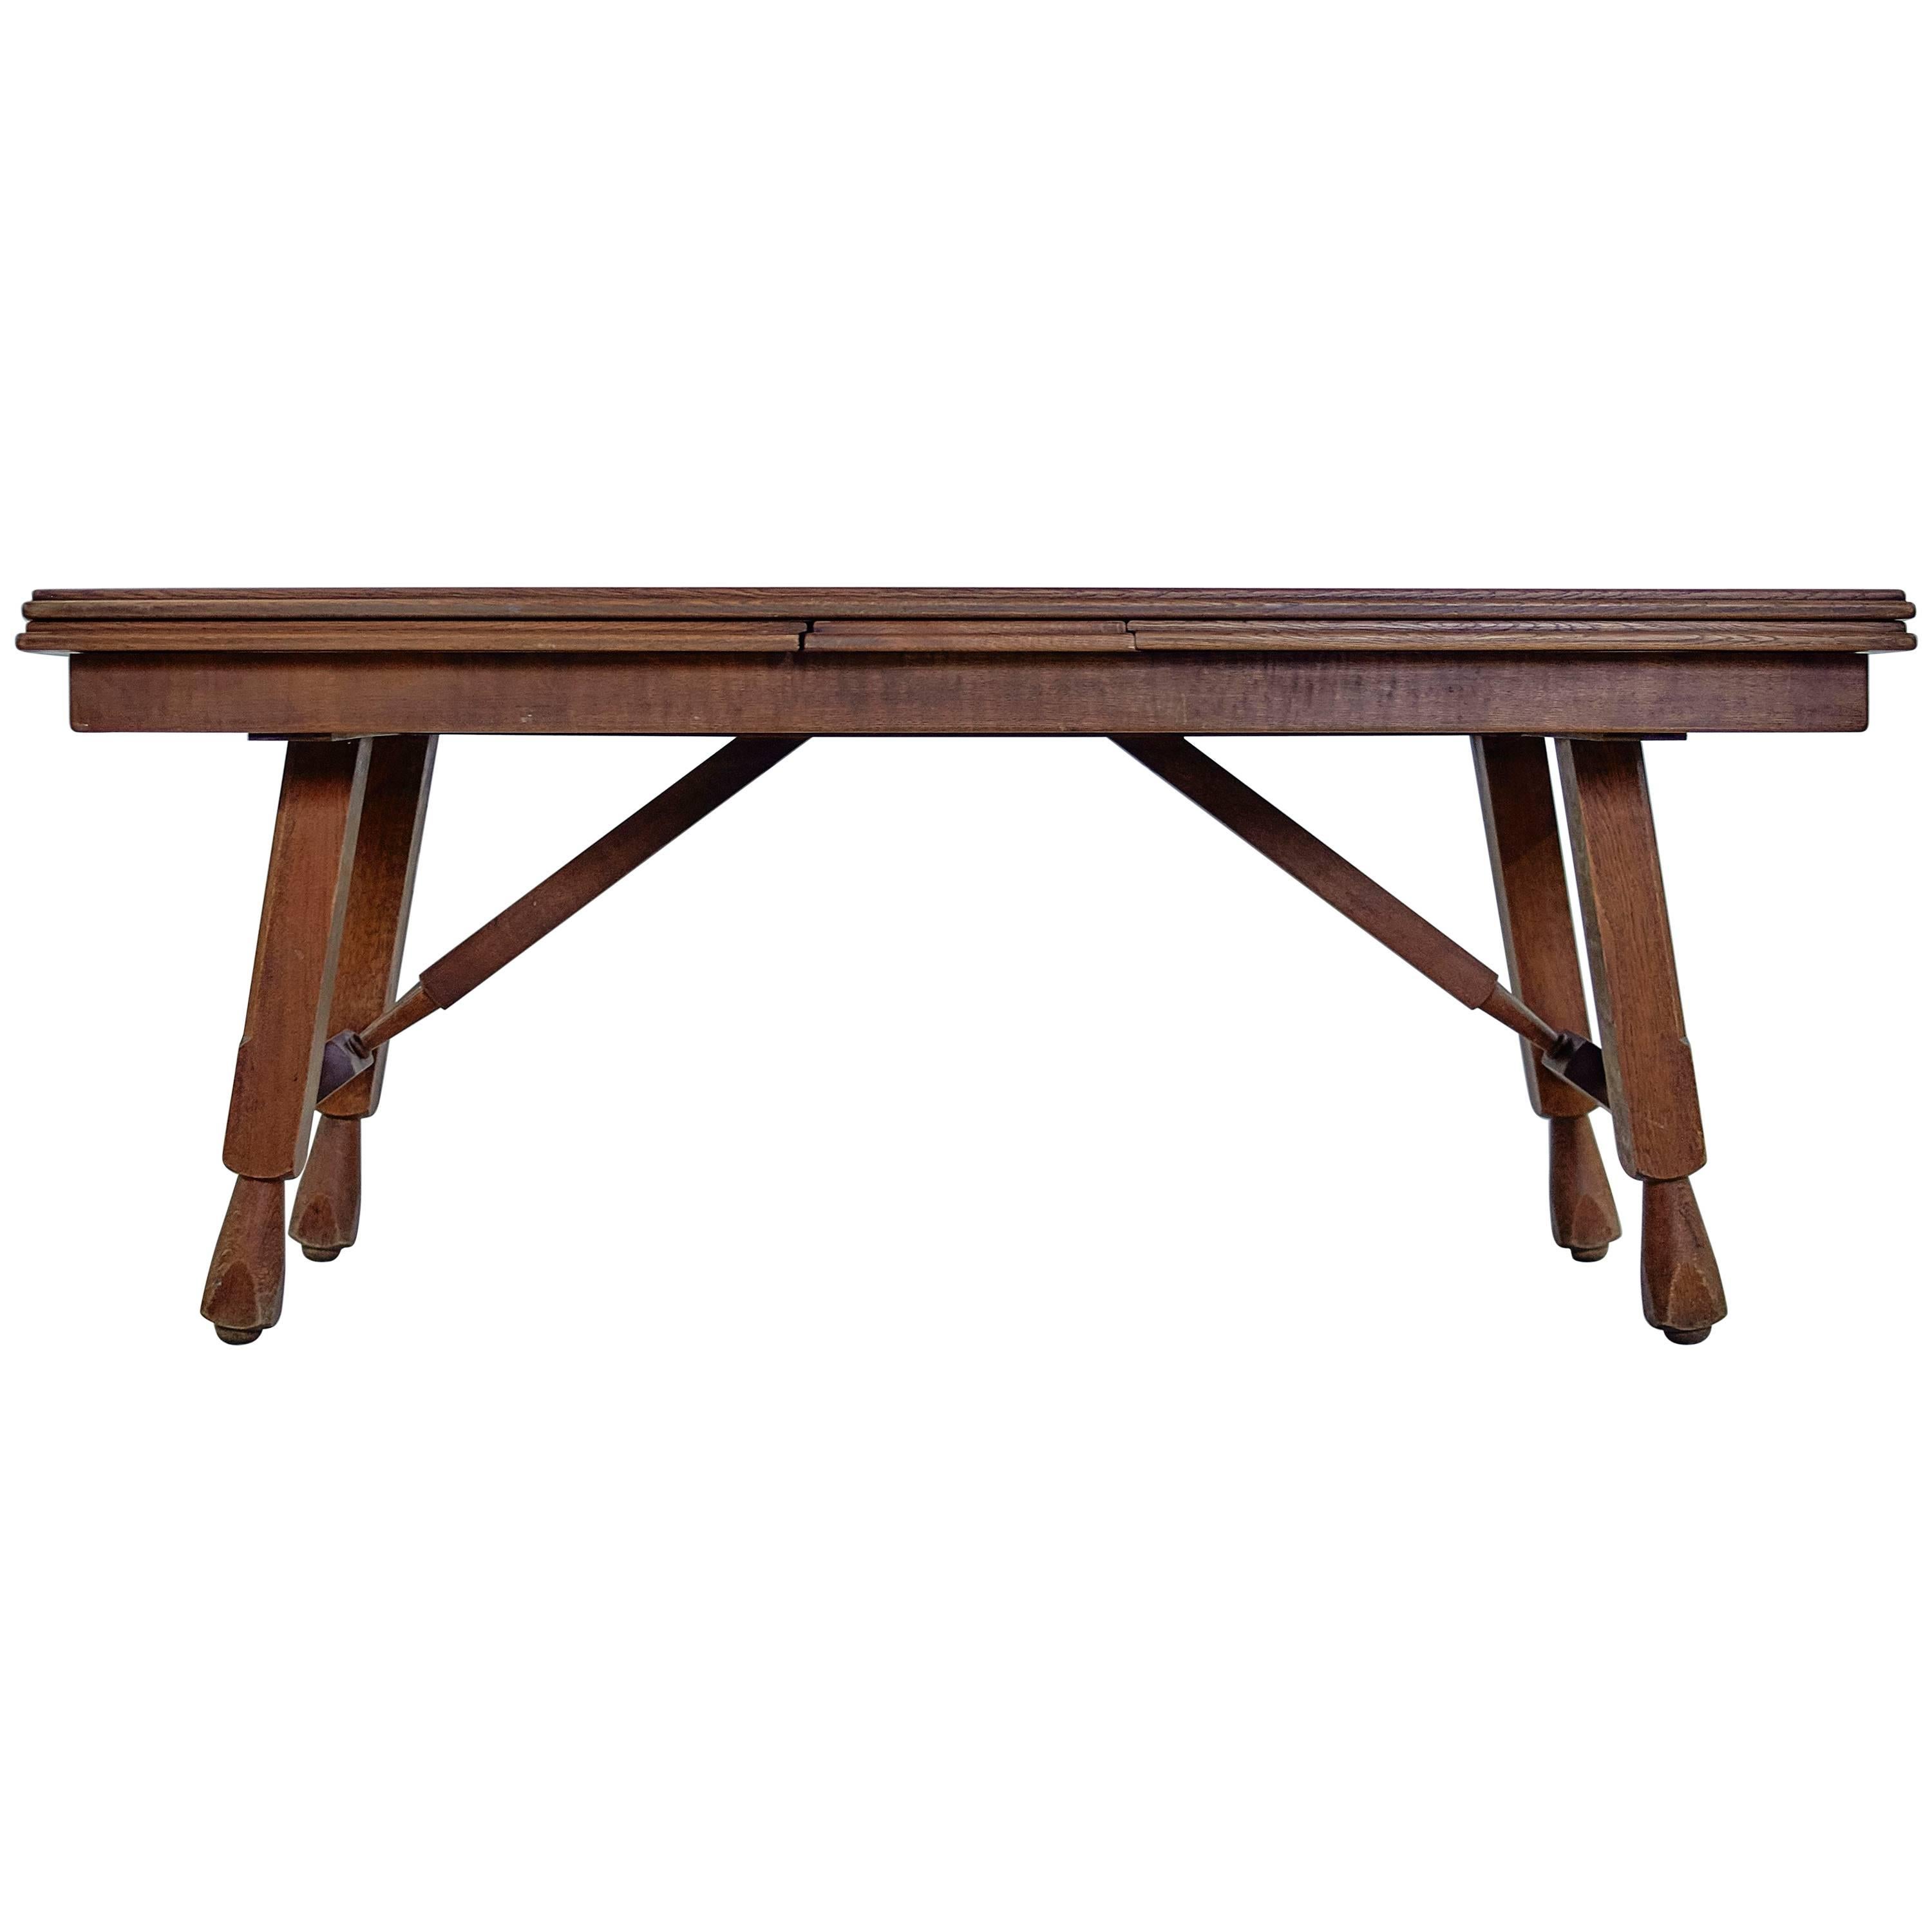 Guillerme & Chambron "Petronille" Extending Oak Dining Table, 1966 For Sale